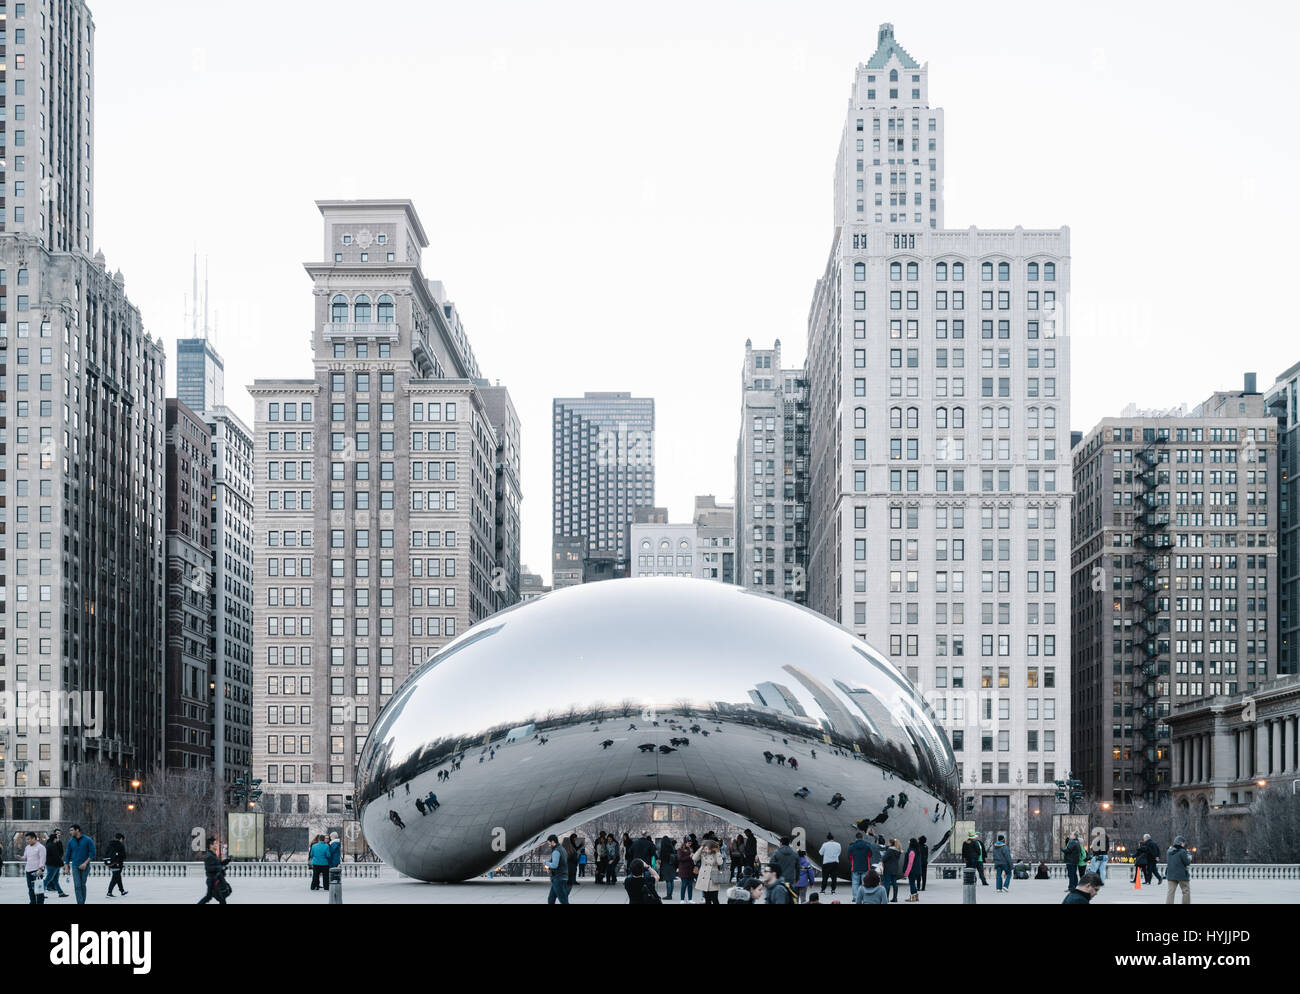 Cloud Gate is a public sculpture by Indian-born British artist Anish Kapoor, it sits in the Millennium Plaza Stock Photo